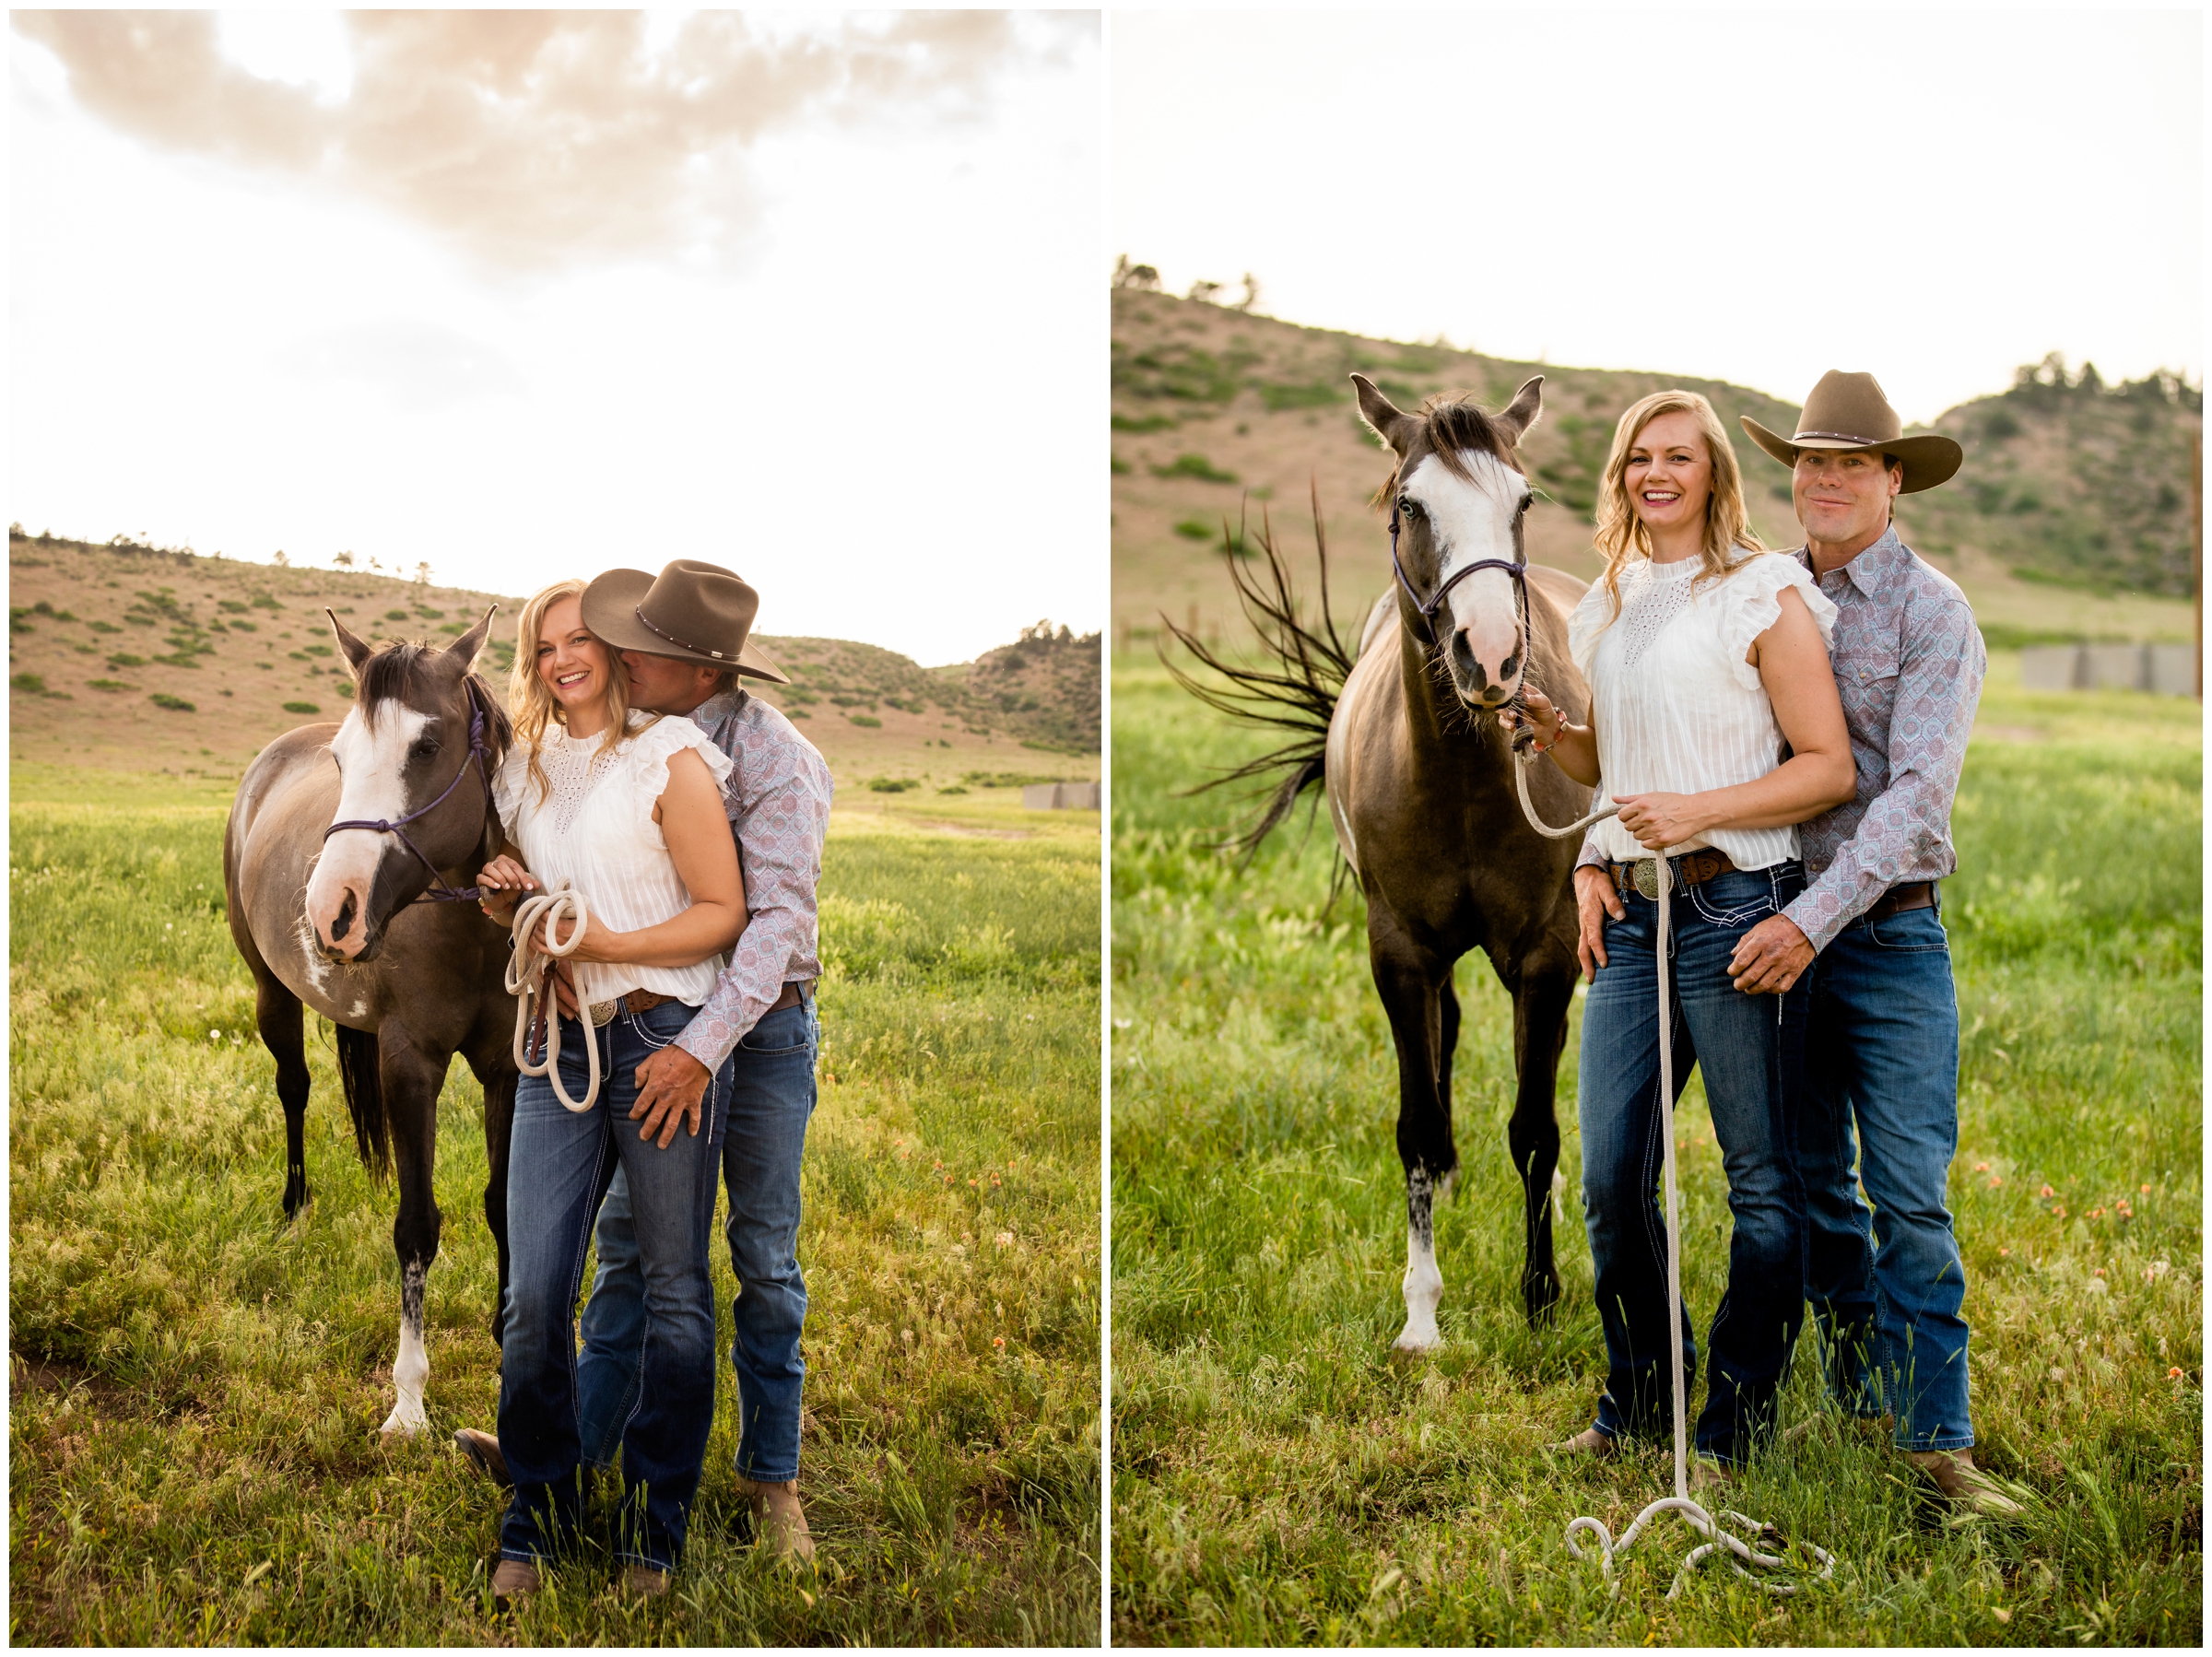 Northern Colorado couples photos with horses and dogs by CO portrait photographer Plum Pretty Photography